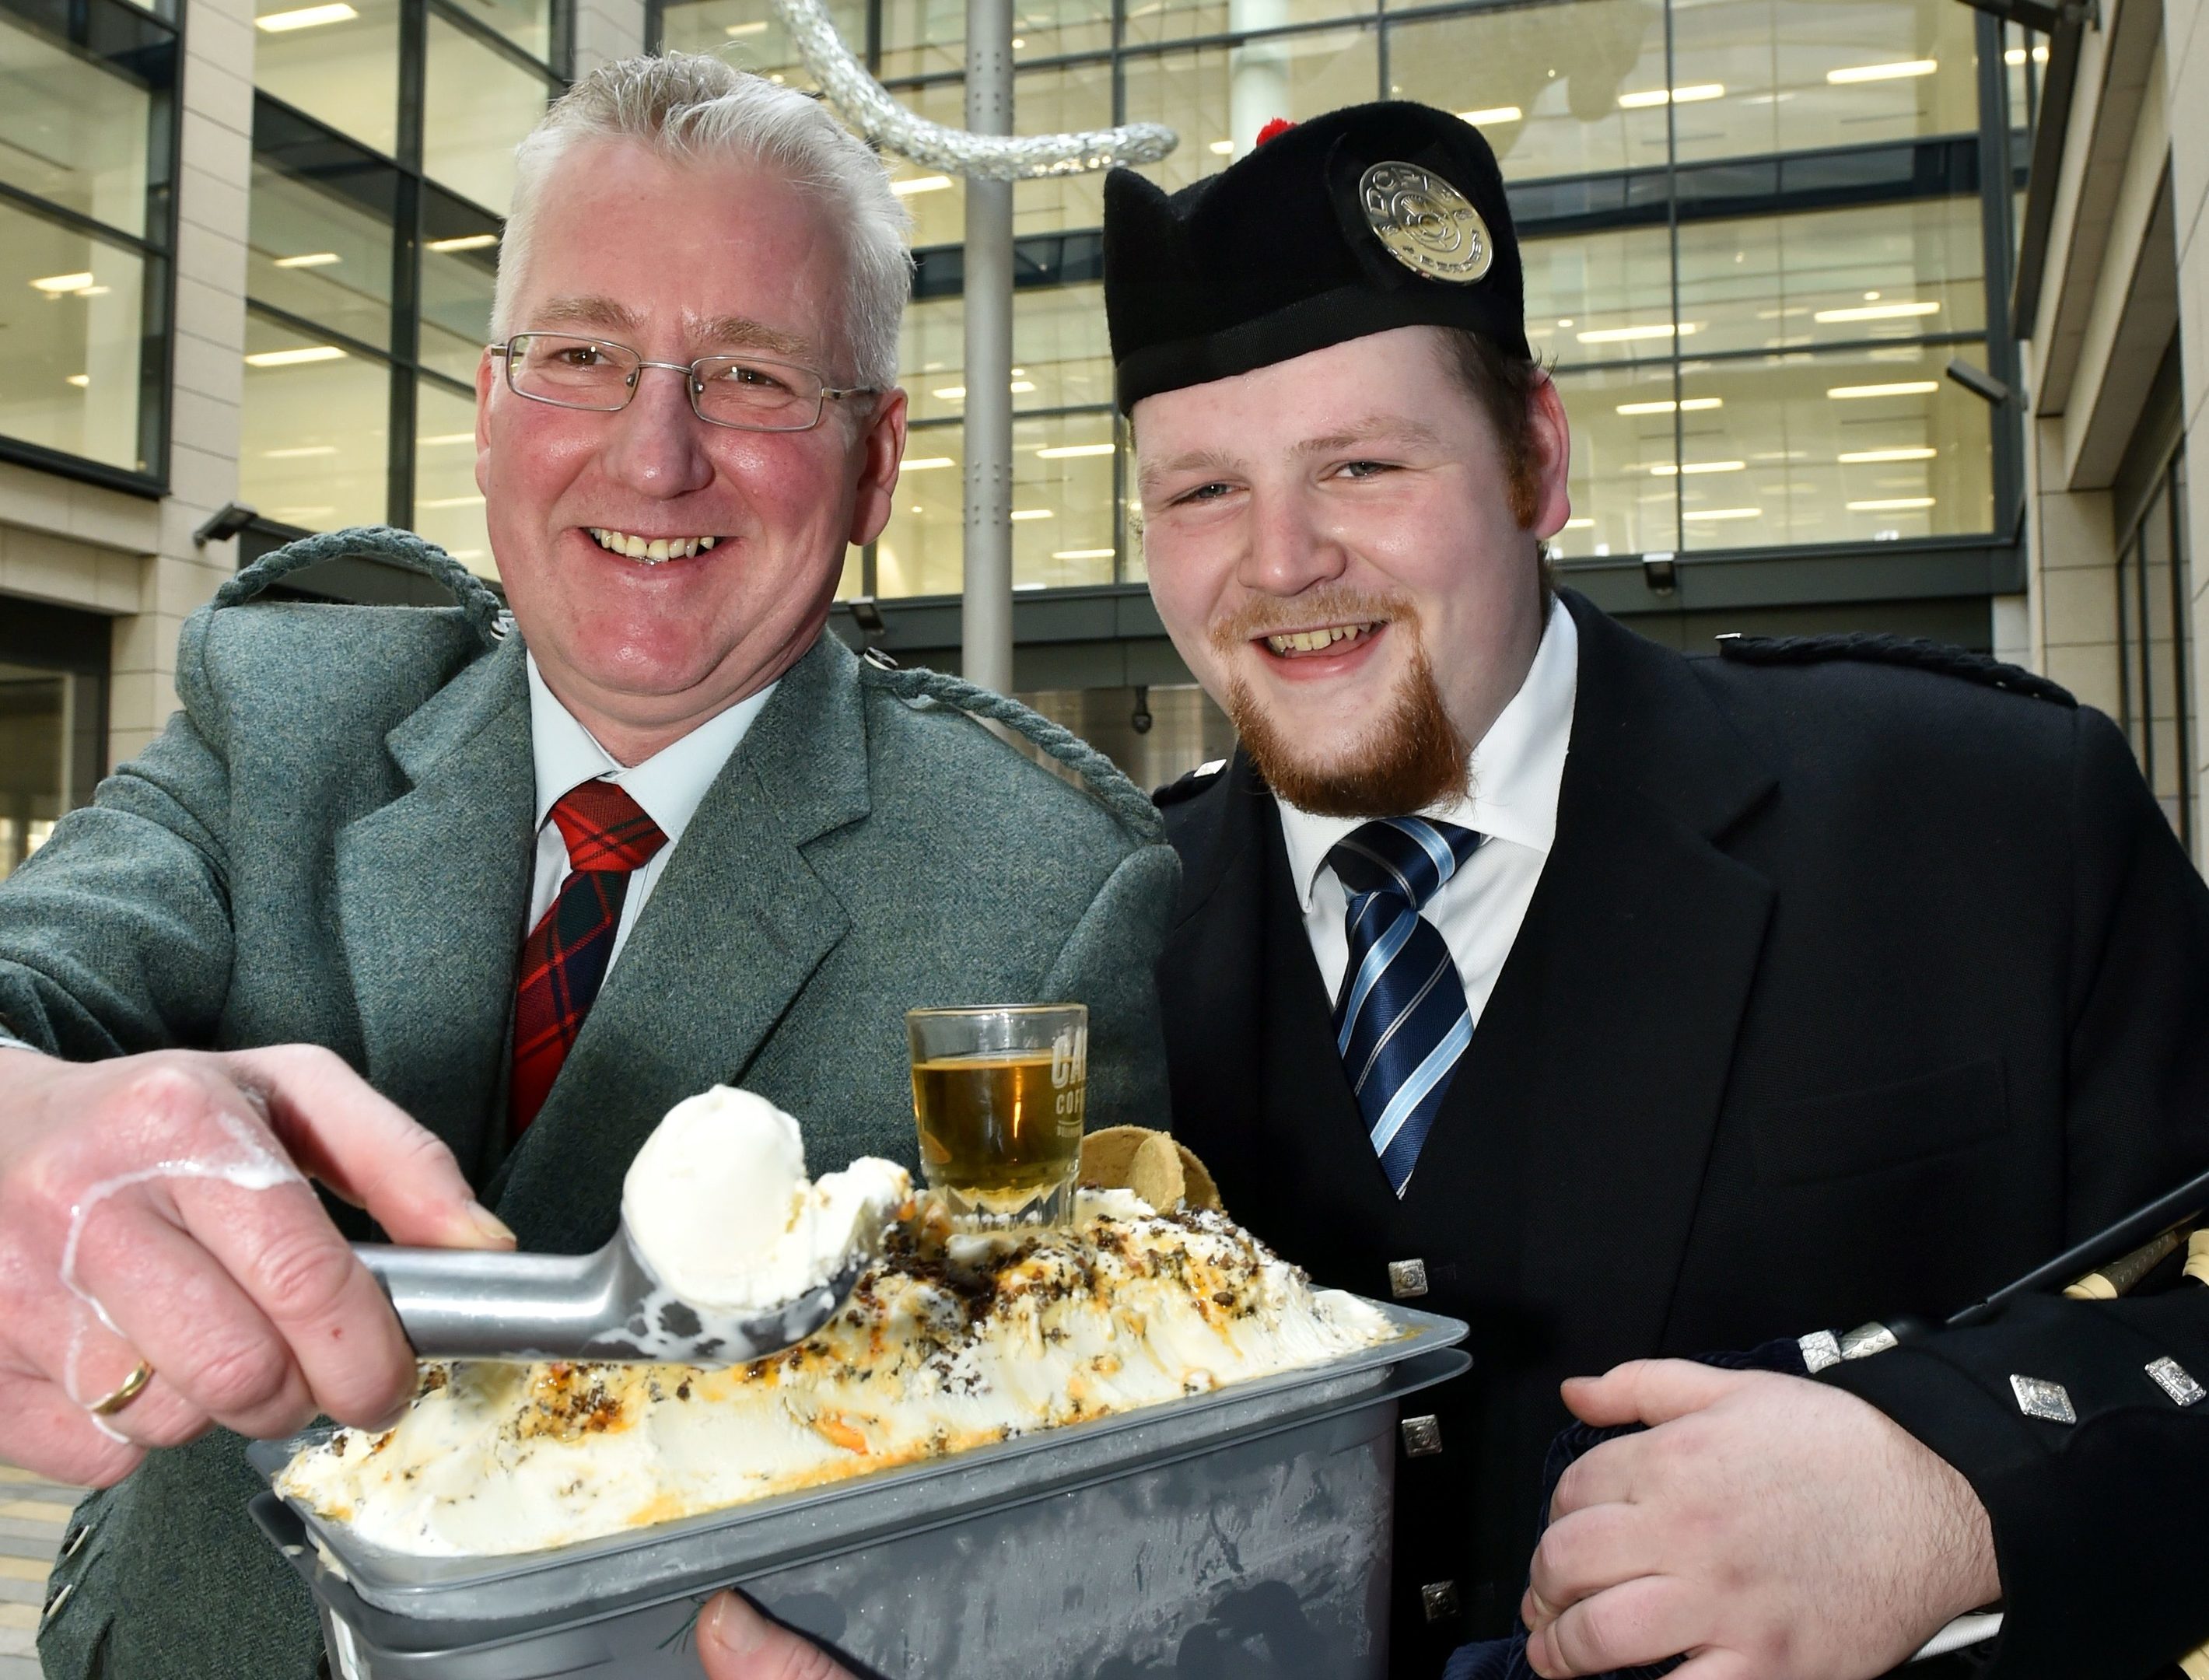 A 'Napoli' of Haggis Ice Cream was piped by Robert Reid, a member of the Deeside Caledona Pipe Band. The Haggis and Marmalade Ice Cream is tasted by Mackie's John Reid. (Colin Rennie)